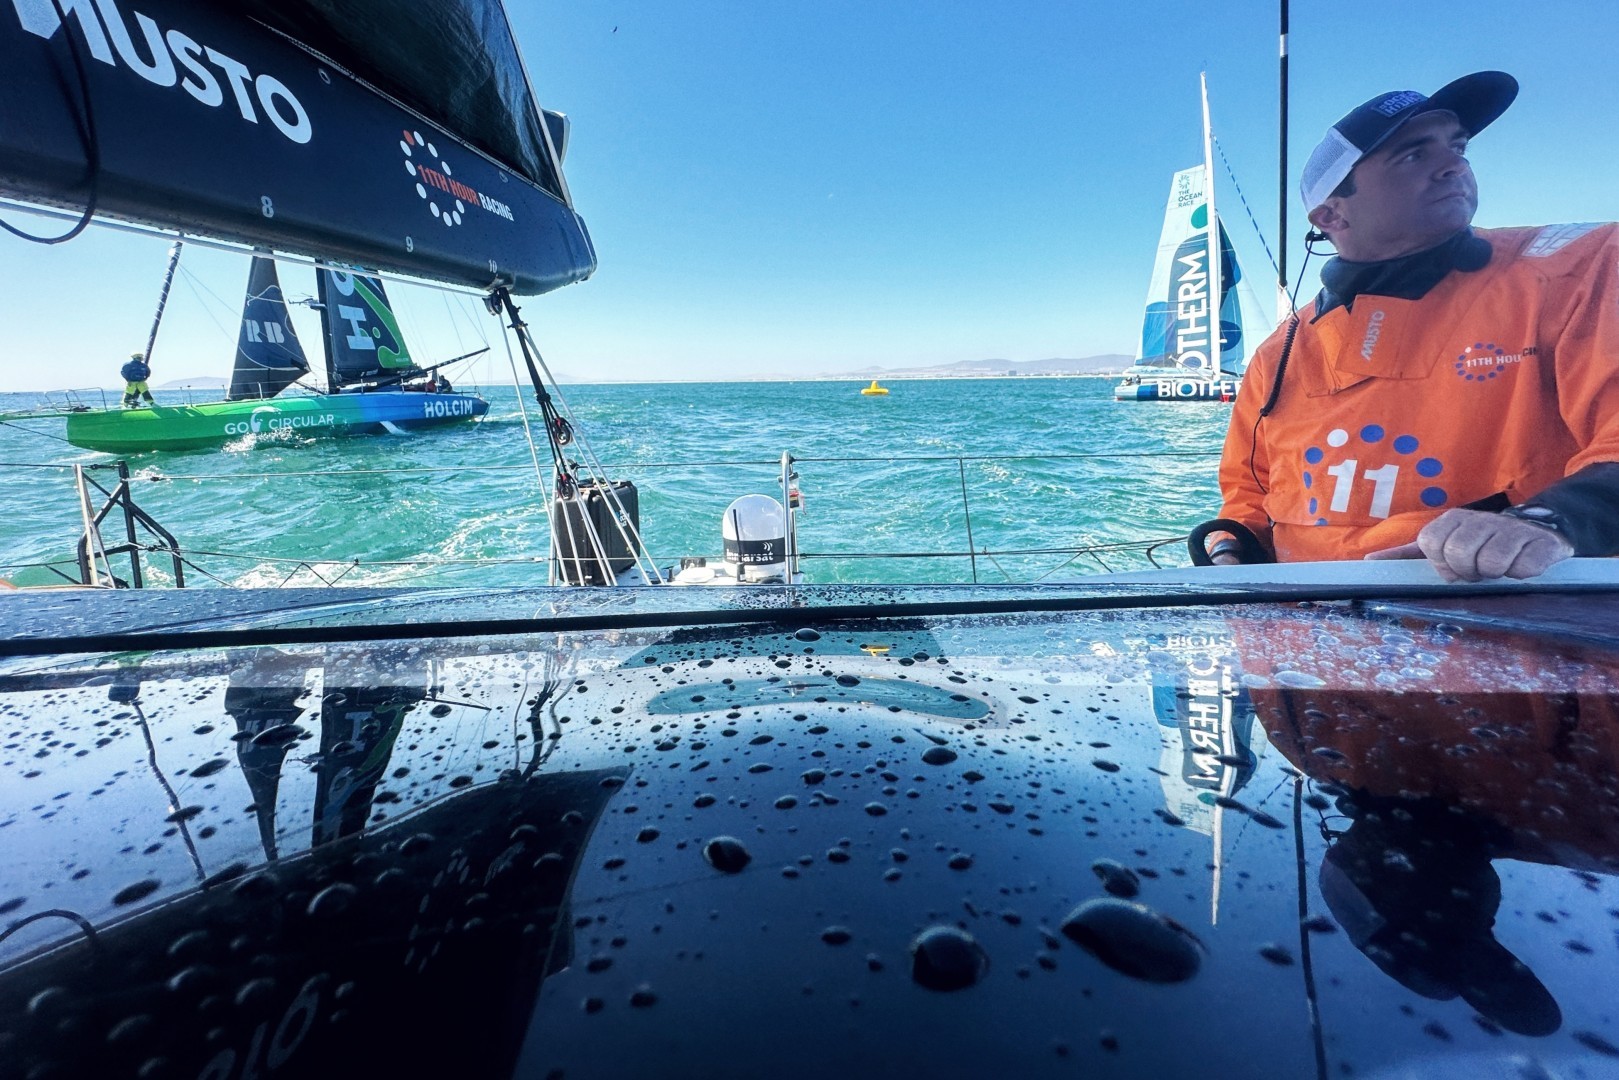 The Ocean Race, Leg 3 onboard 11th Hour Racing Team. Fresh conditions at the start of Leg 3. © Amory Ross / 11th Hour Racing / The Ocean Race